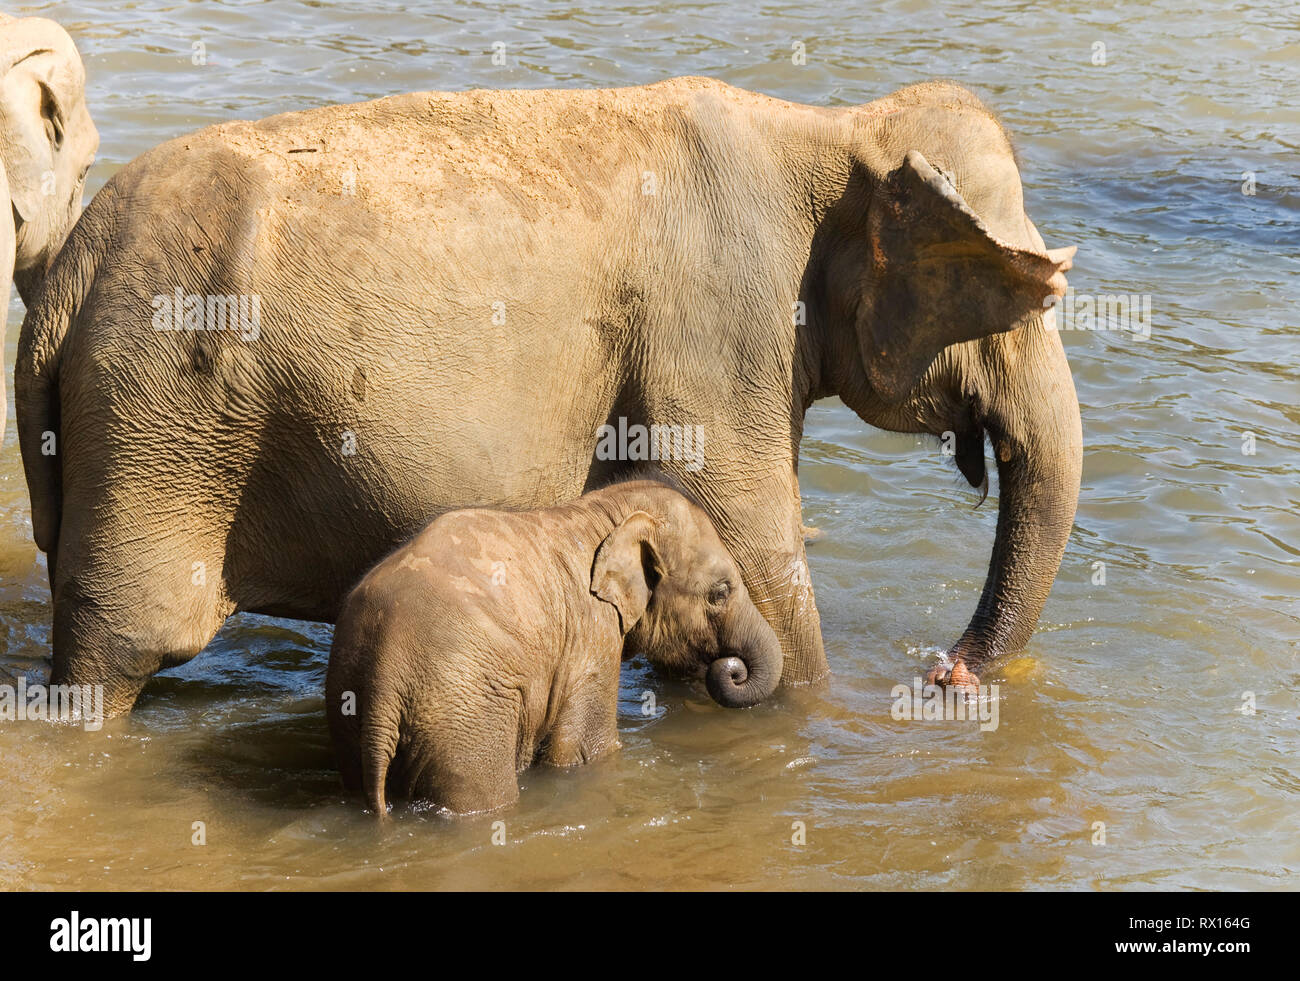 Elephant baby with mother in the river Stock Photo